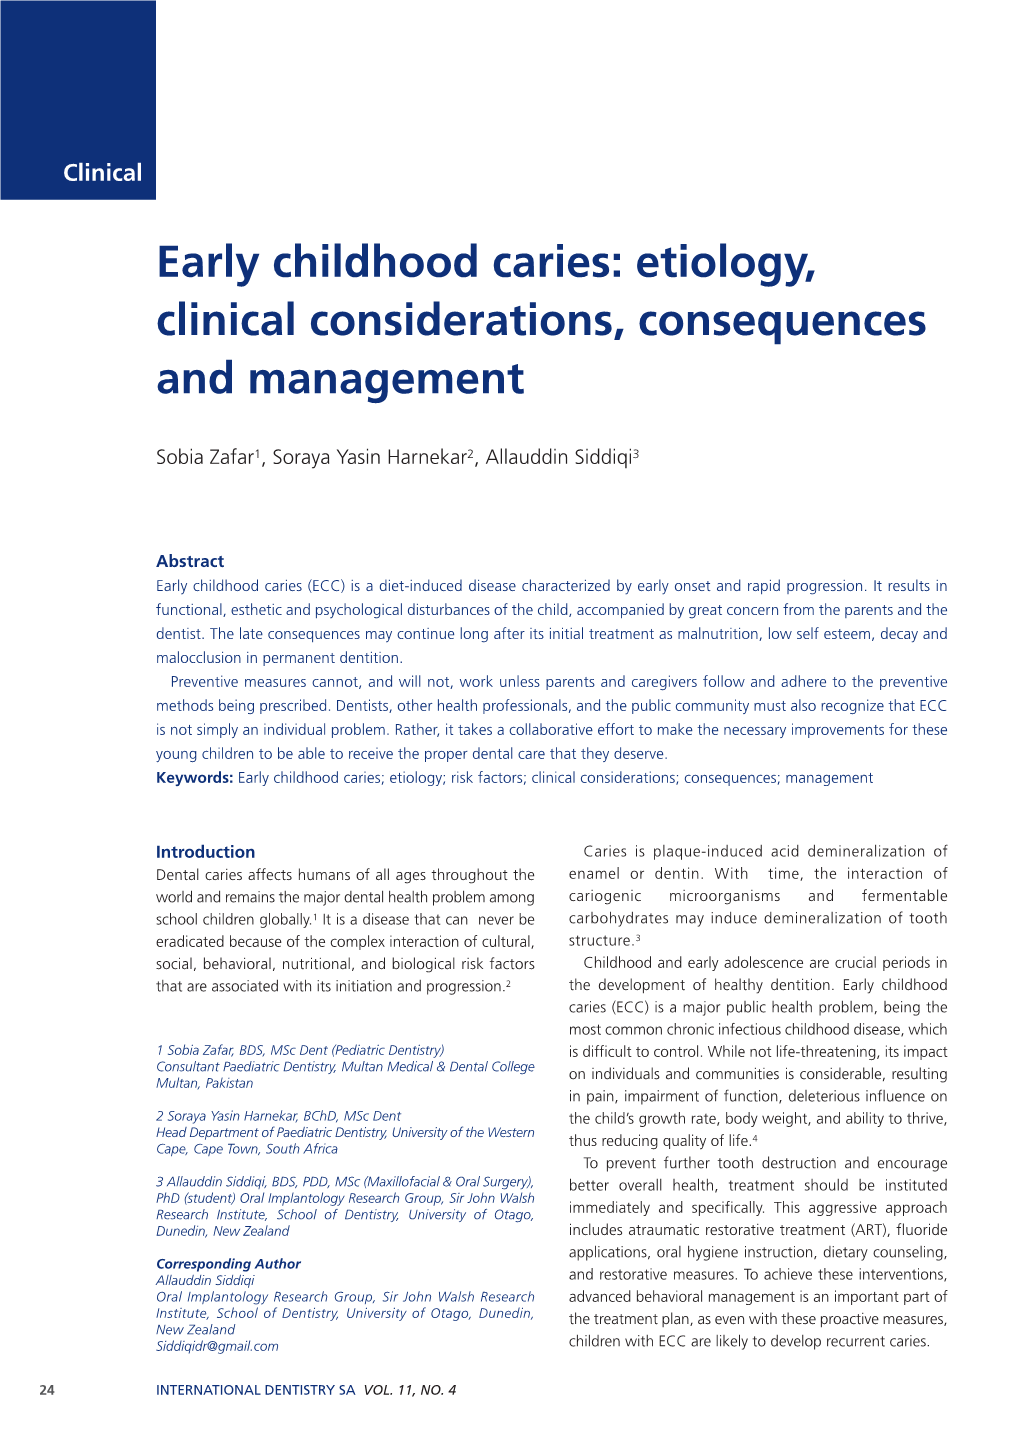 Early Childhood Caries: Etiology, Clinical Considerations, Consequences and Management